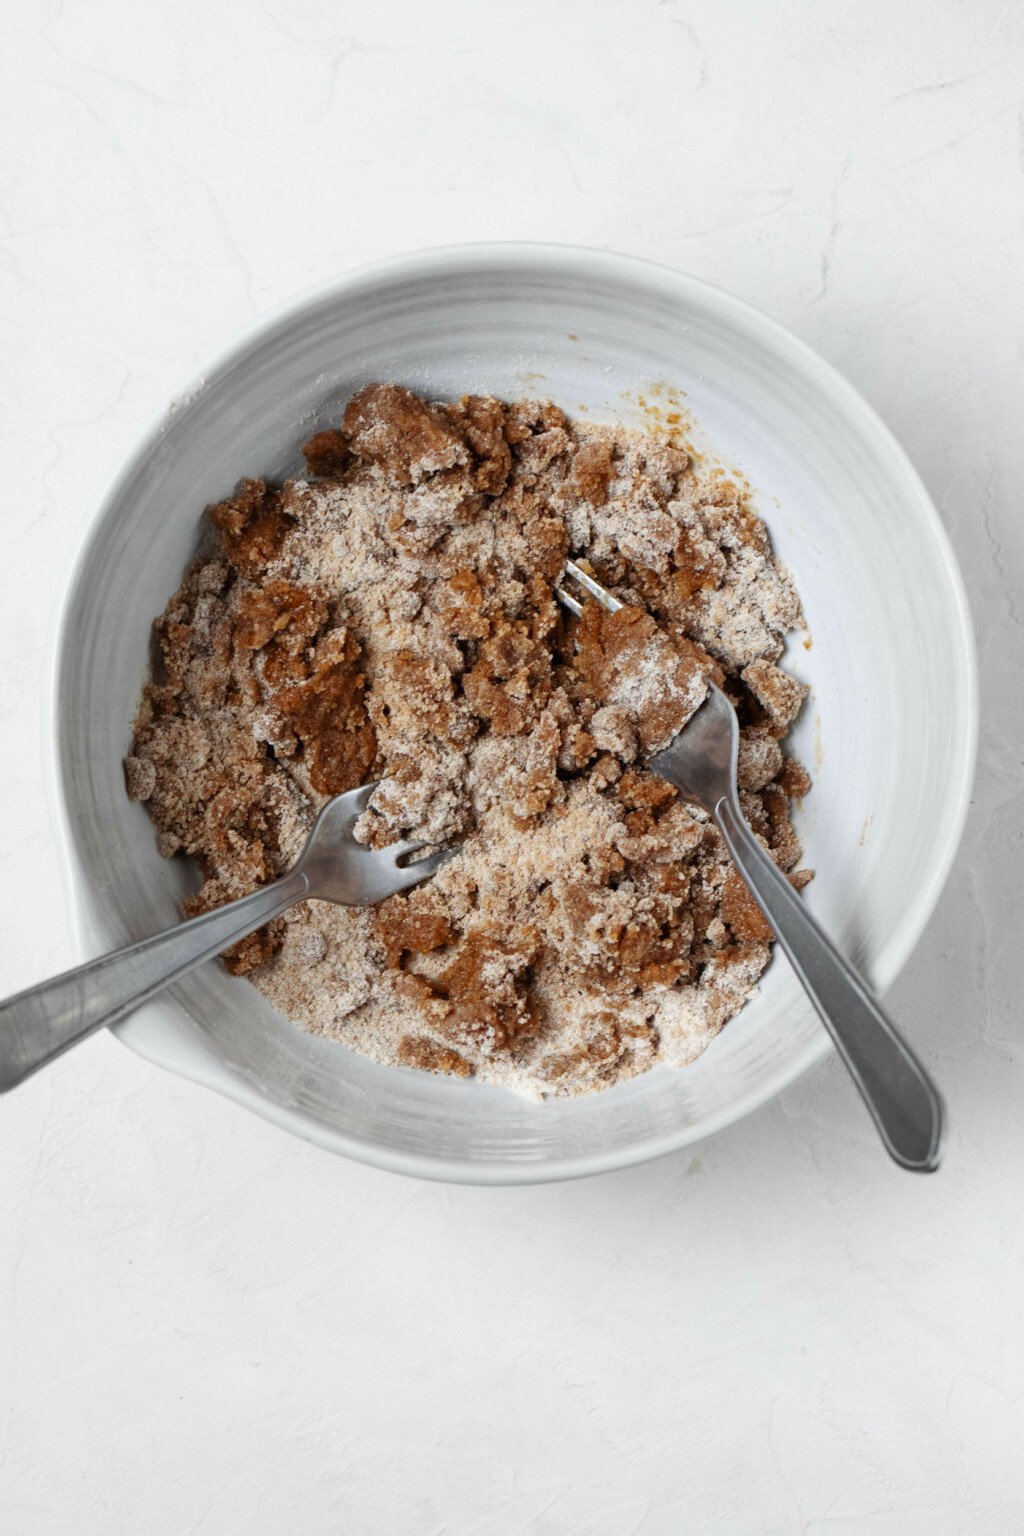 A white mixing bowl is pictured overhead, resting on a white surface. There are two forks in the bowl, which are being used to mix a vegan streusel topping.